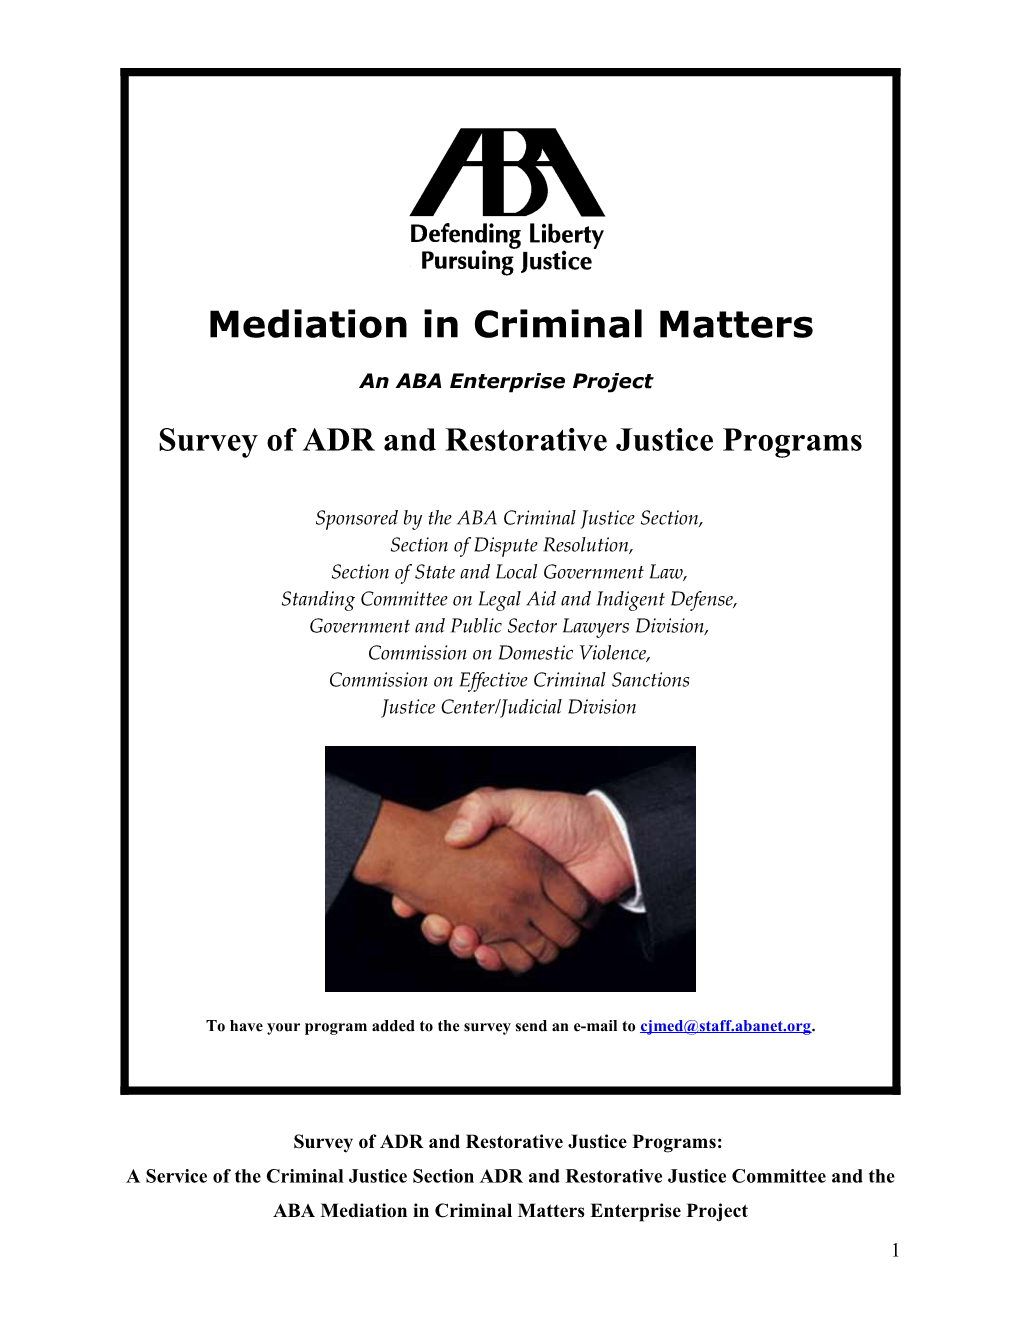 Mediation in Criminal Matters Project